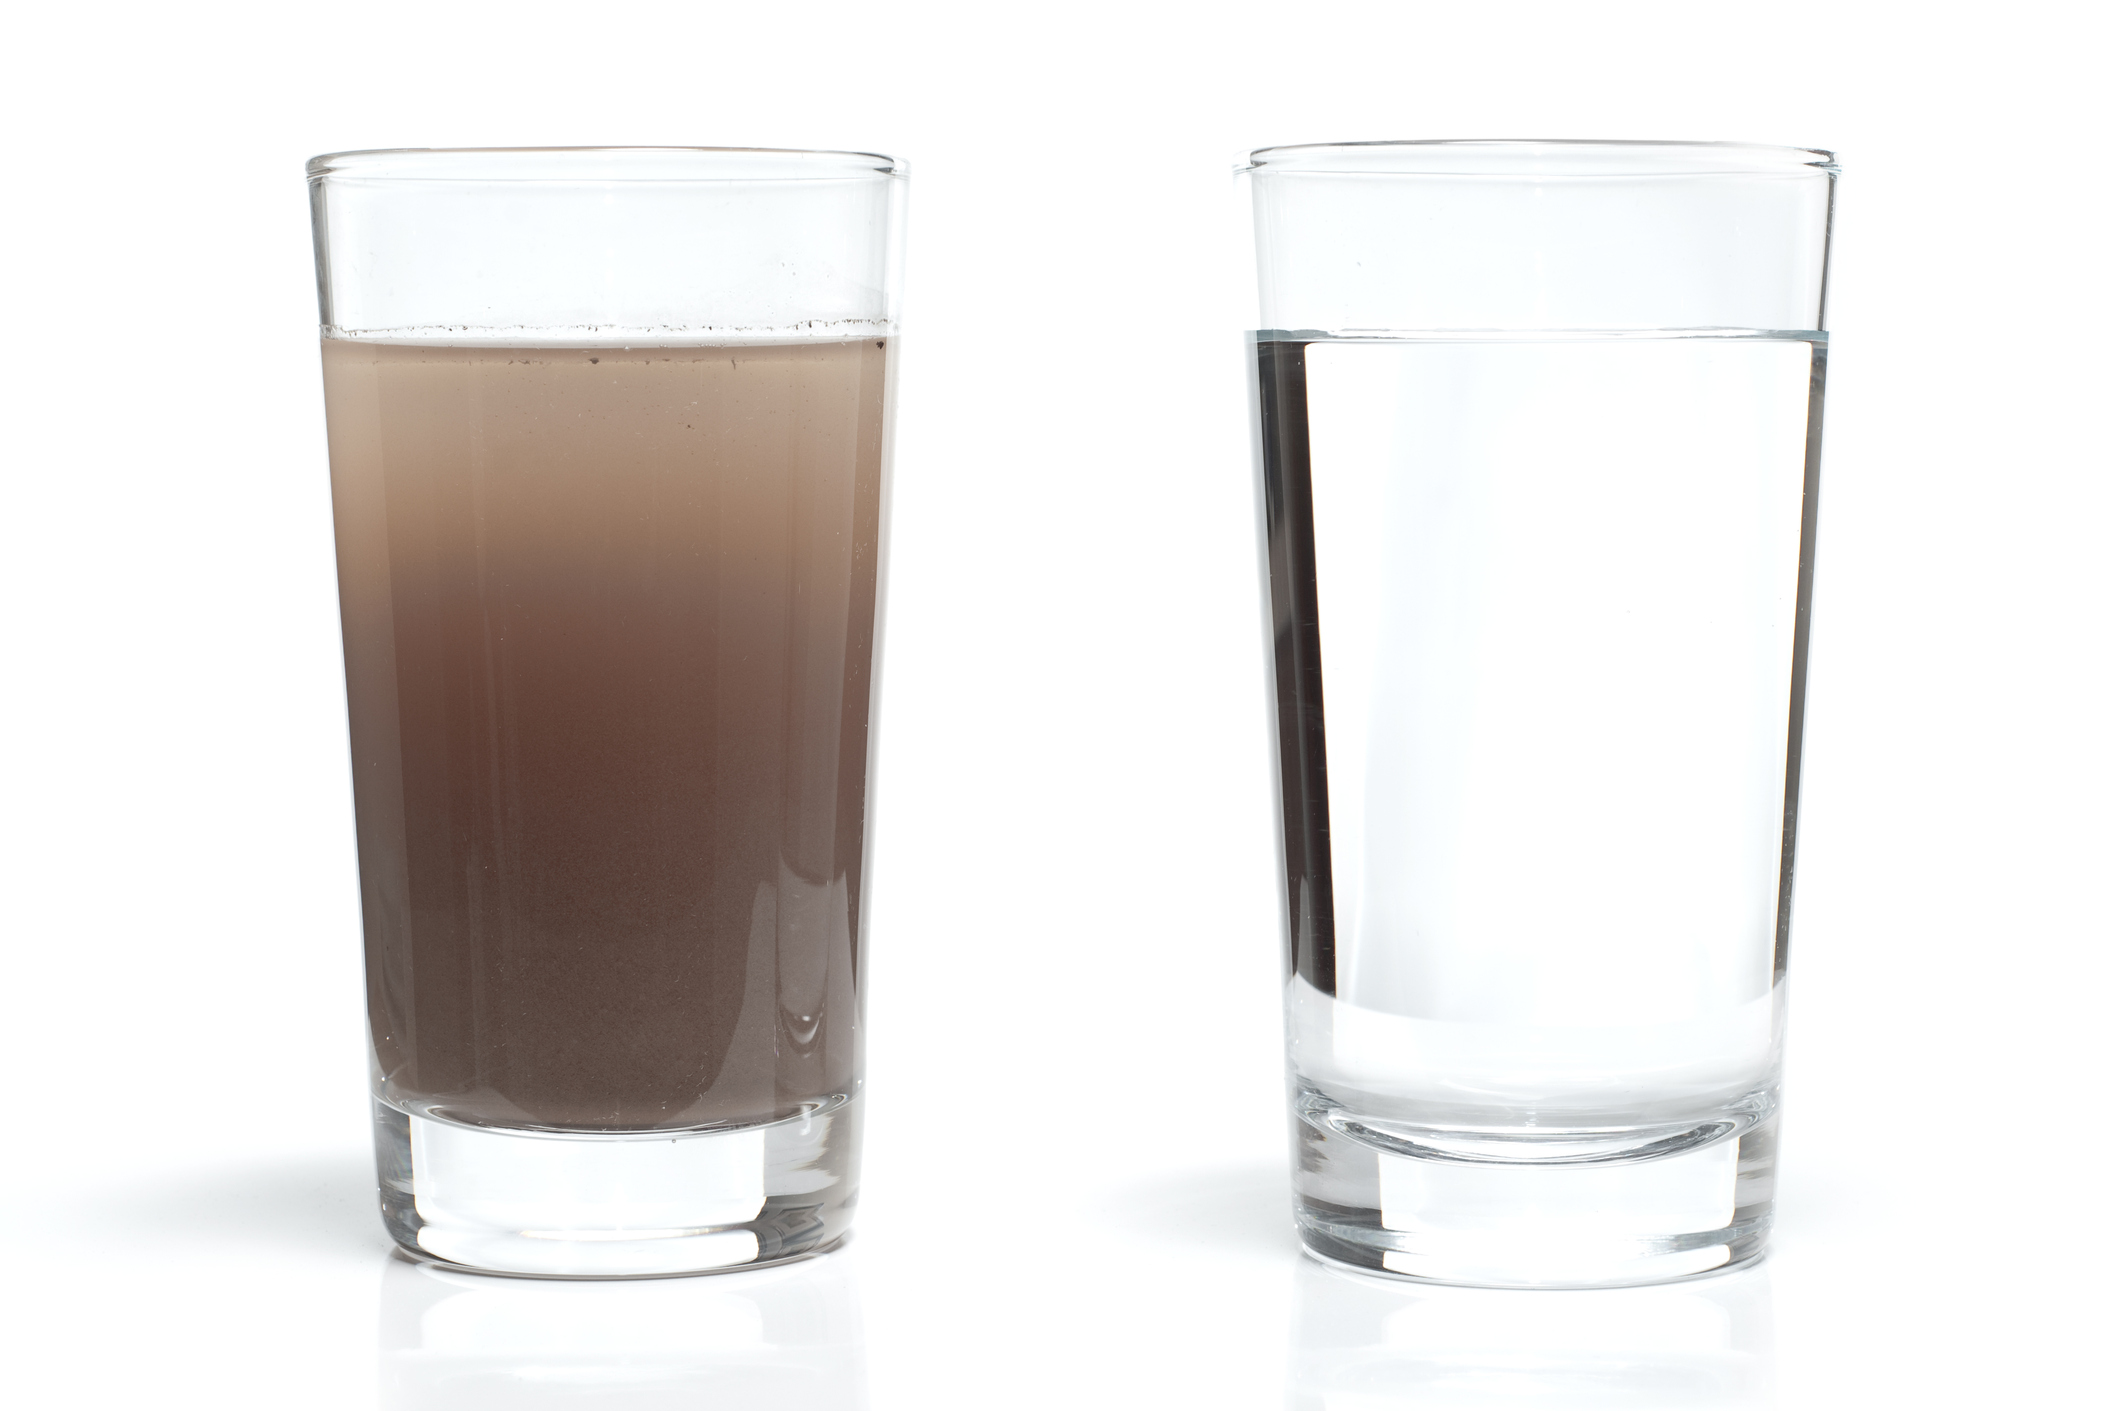 Two water glasses. One with dirty water and the other with fresh, clean water.